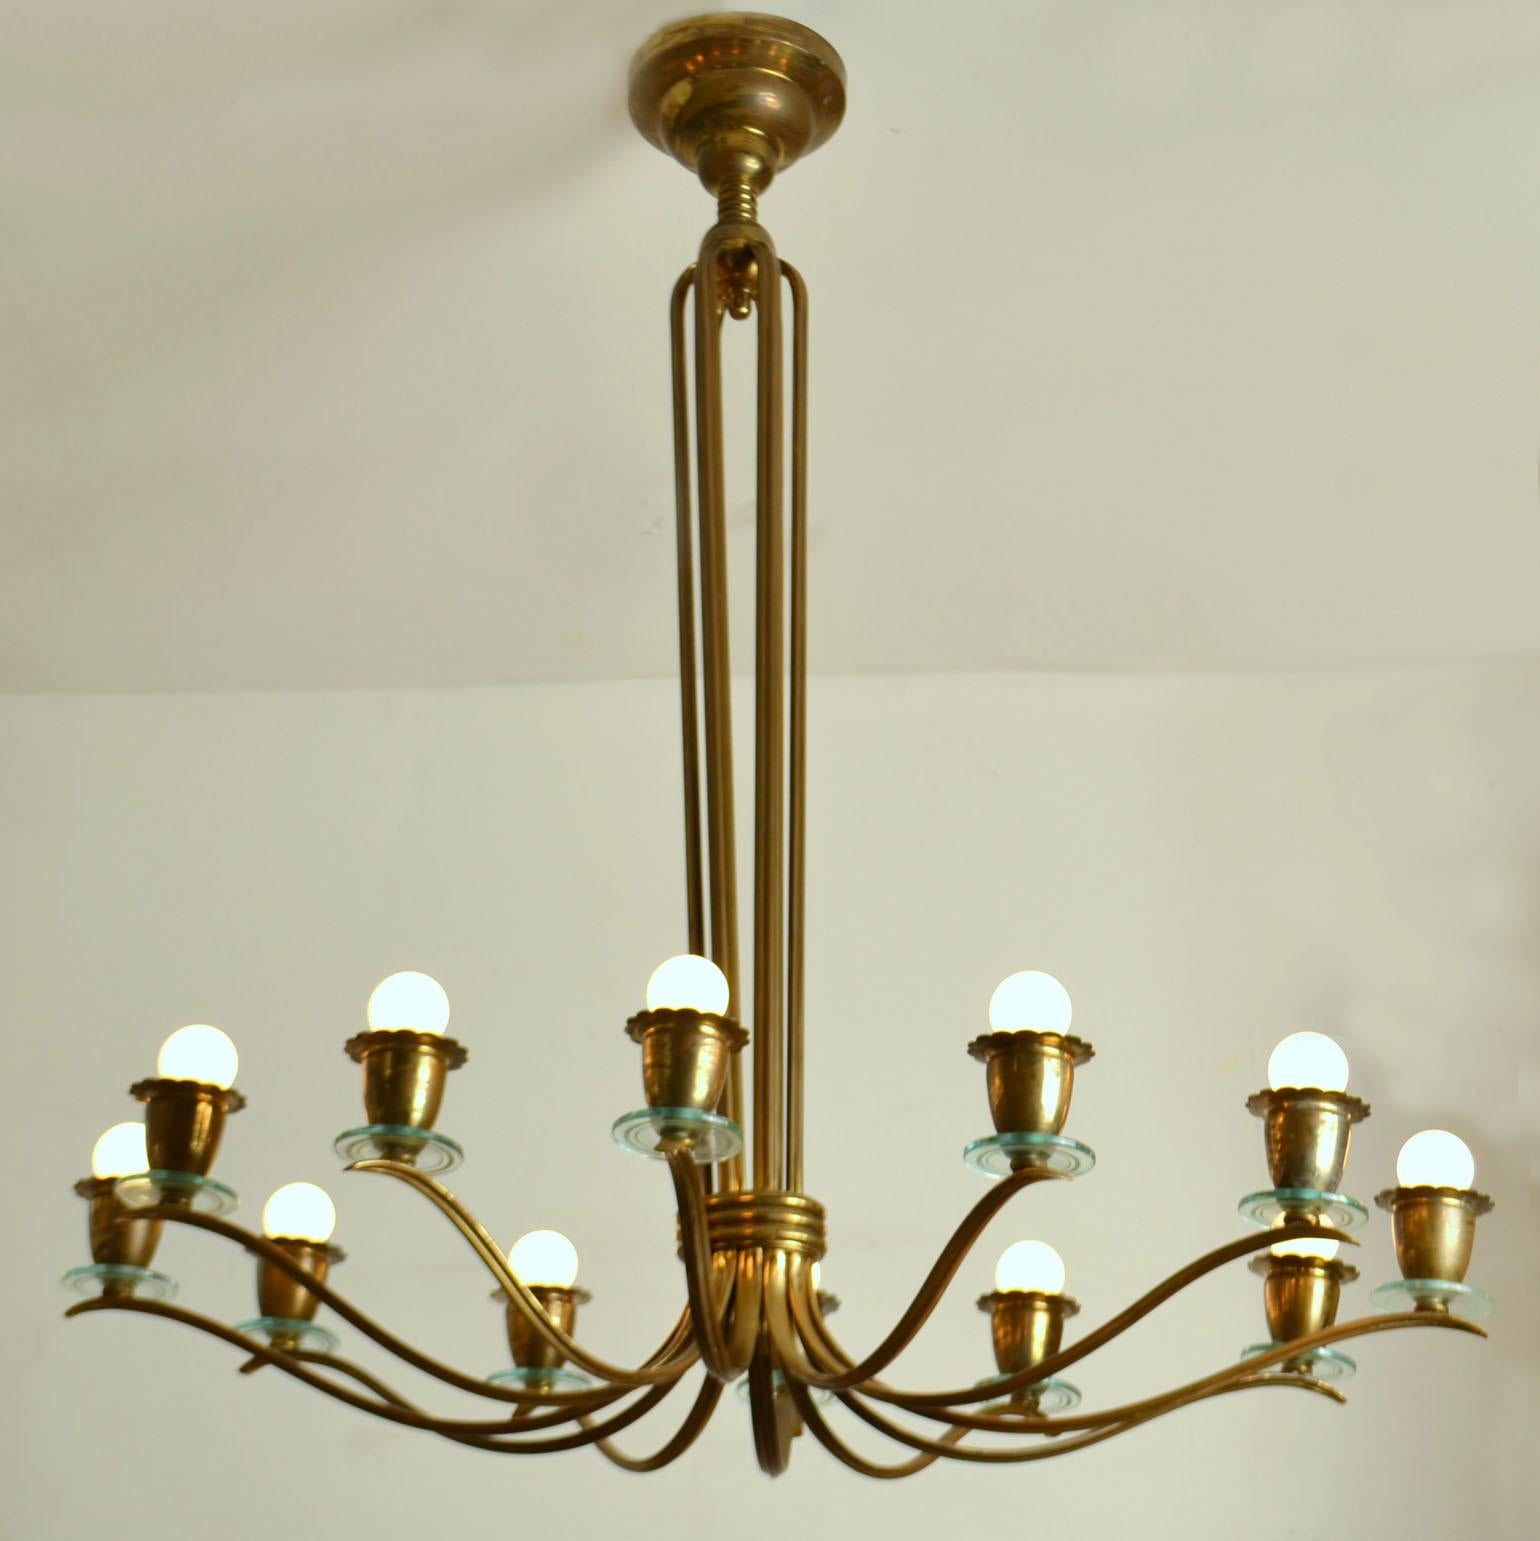 Oval brass chandelier designed in the style of Pietro Chiesa for the Italian manufacturer Fontana Arte in the 1940's is made in a brass structure with 12 arms and lights. At each end we find the bulb holder in the shape of a flower cup. The lights